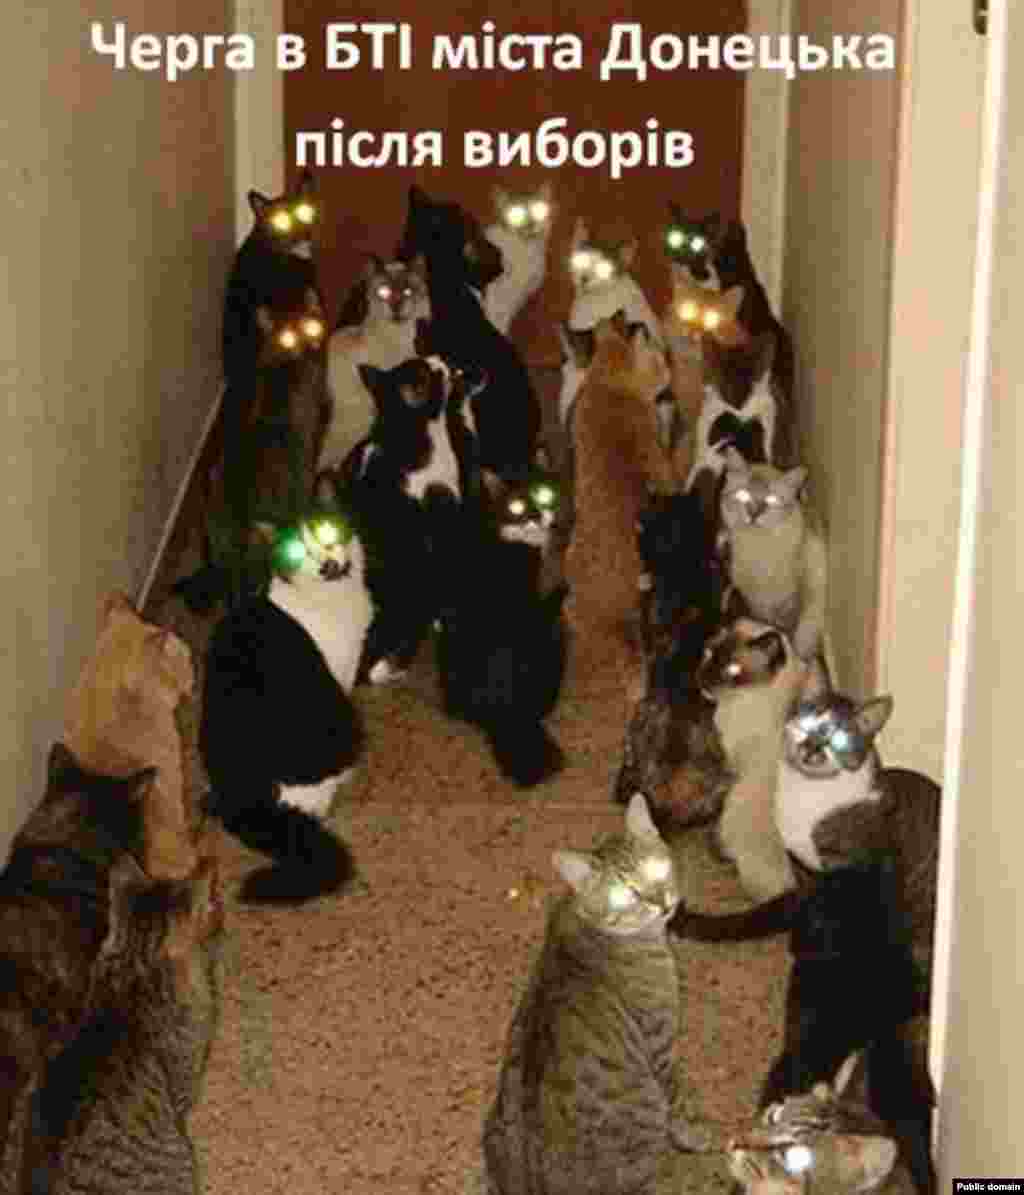 Cats shown &quot;queing up outside the Donetsk property office.&quot;